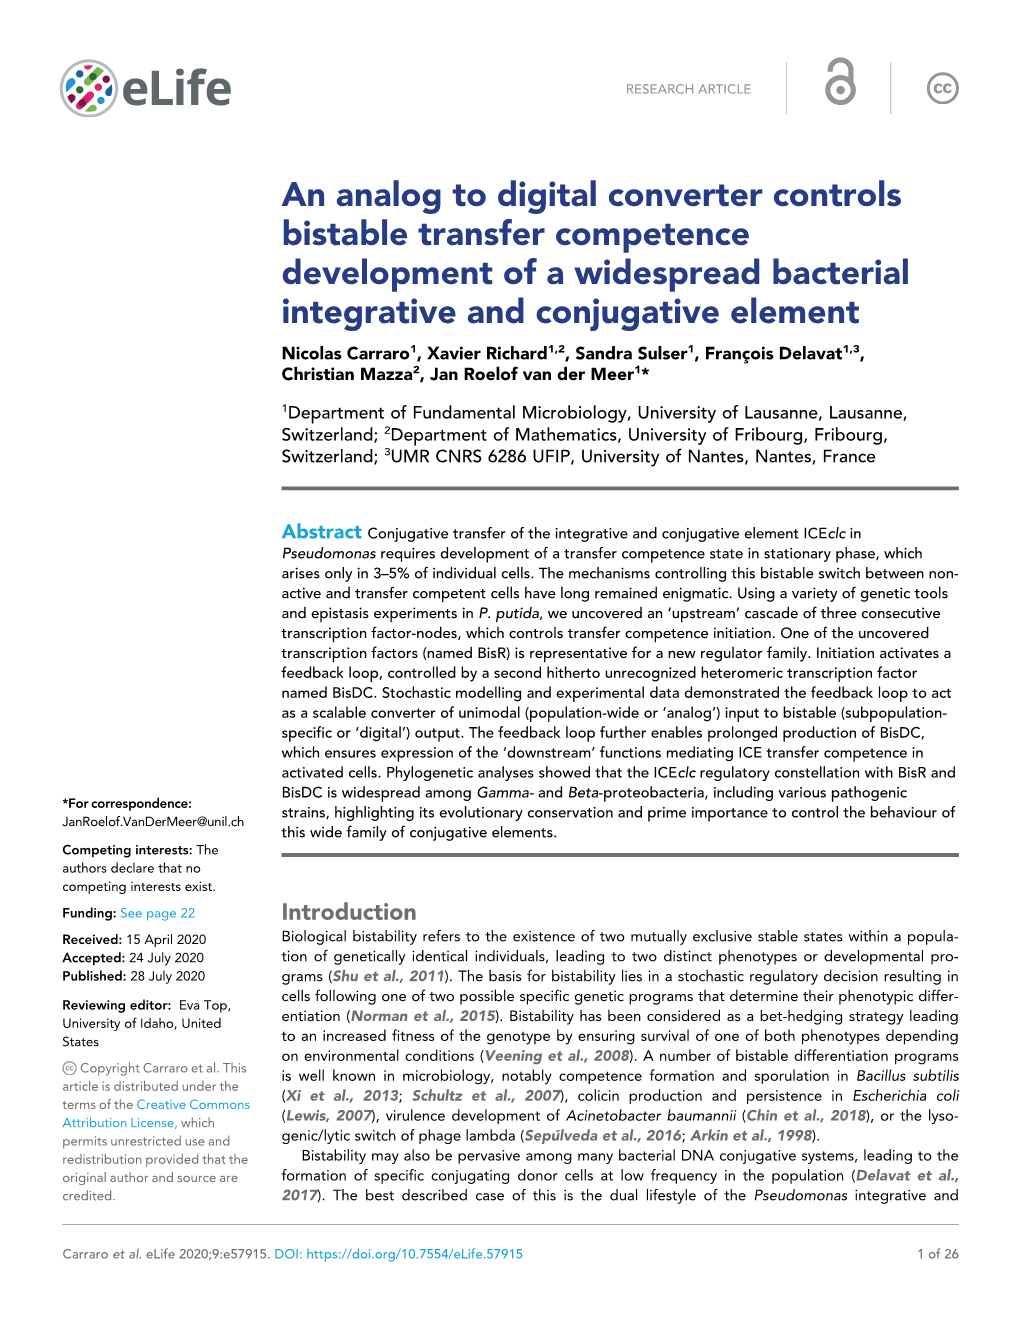 An Analog to Digital Converter Controls Bistable Transfer Competence